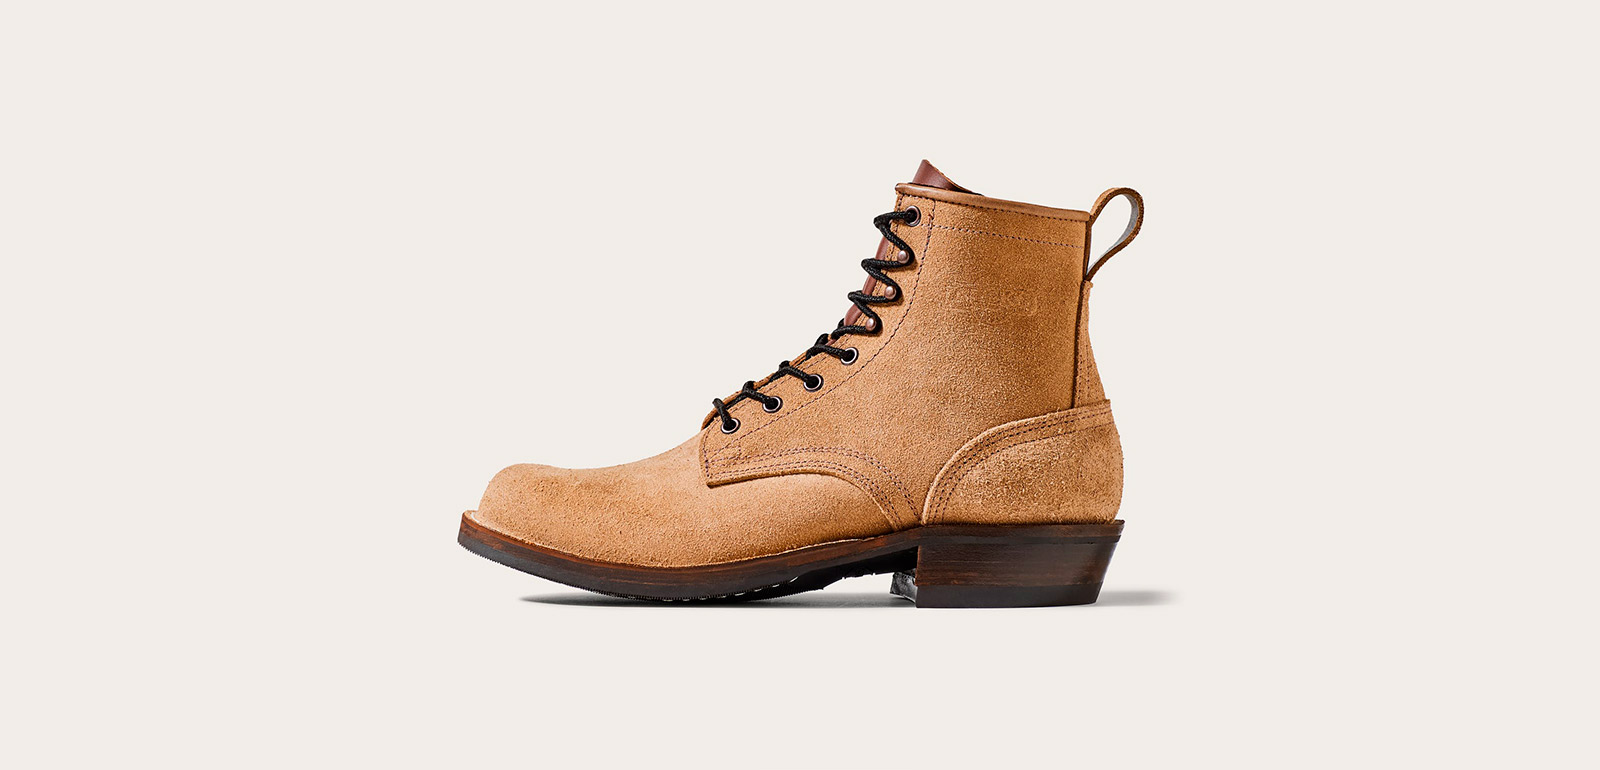 Nicks Robert Suede Roughout Boots